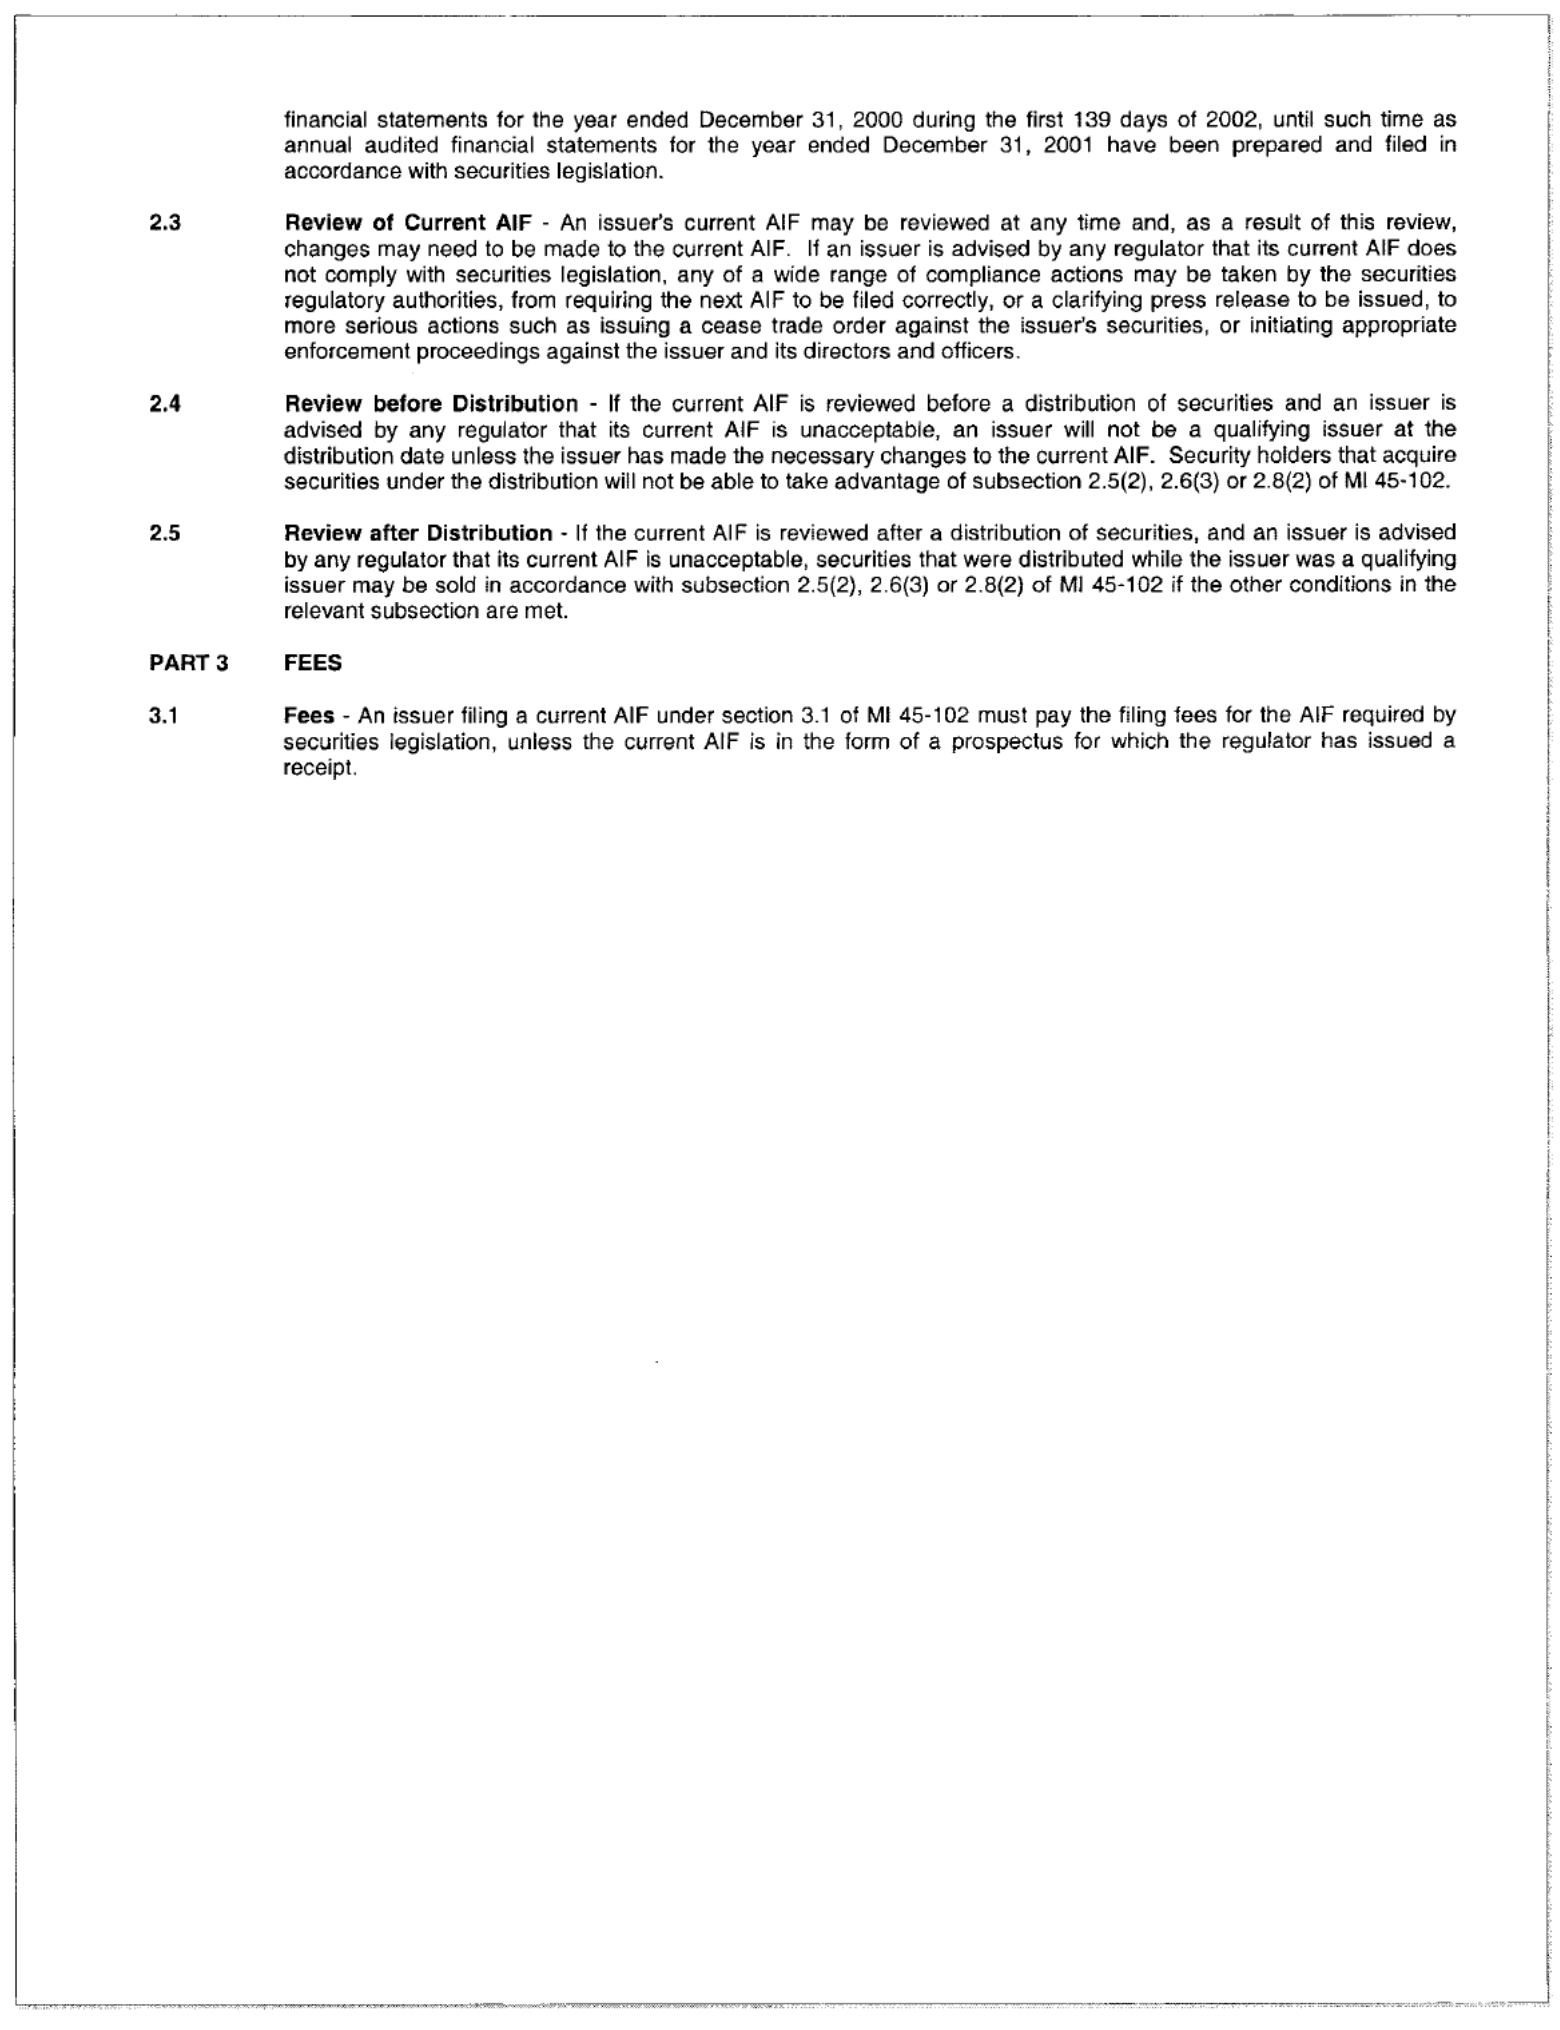 Image containing information of ontario securities commission